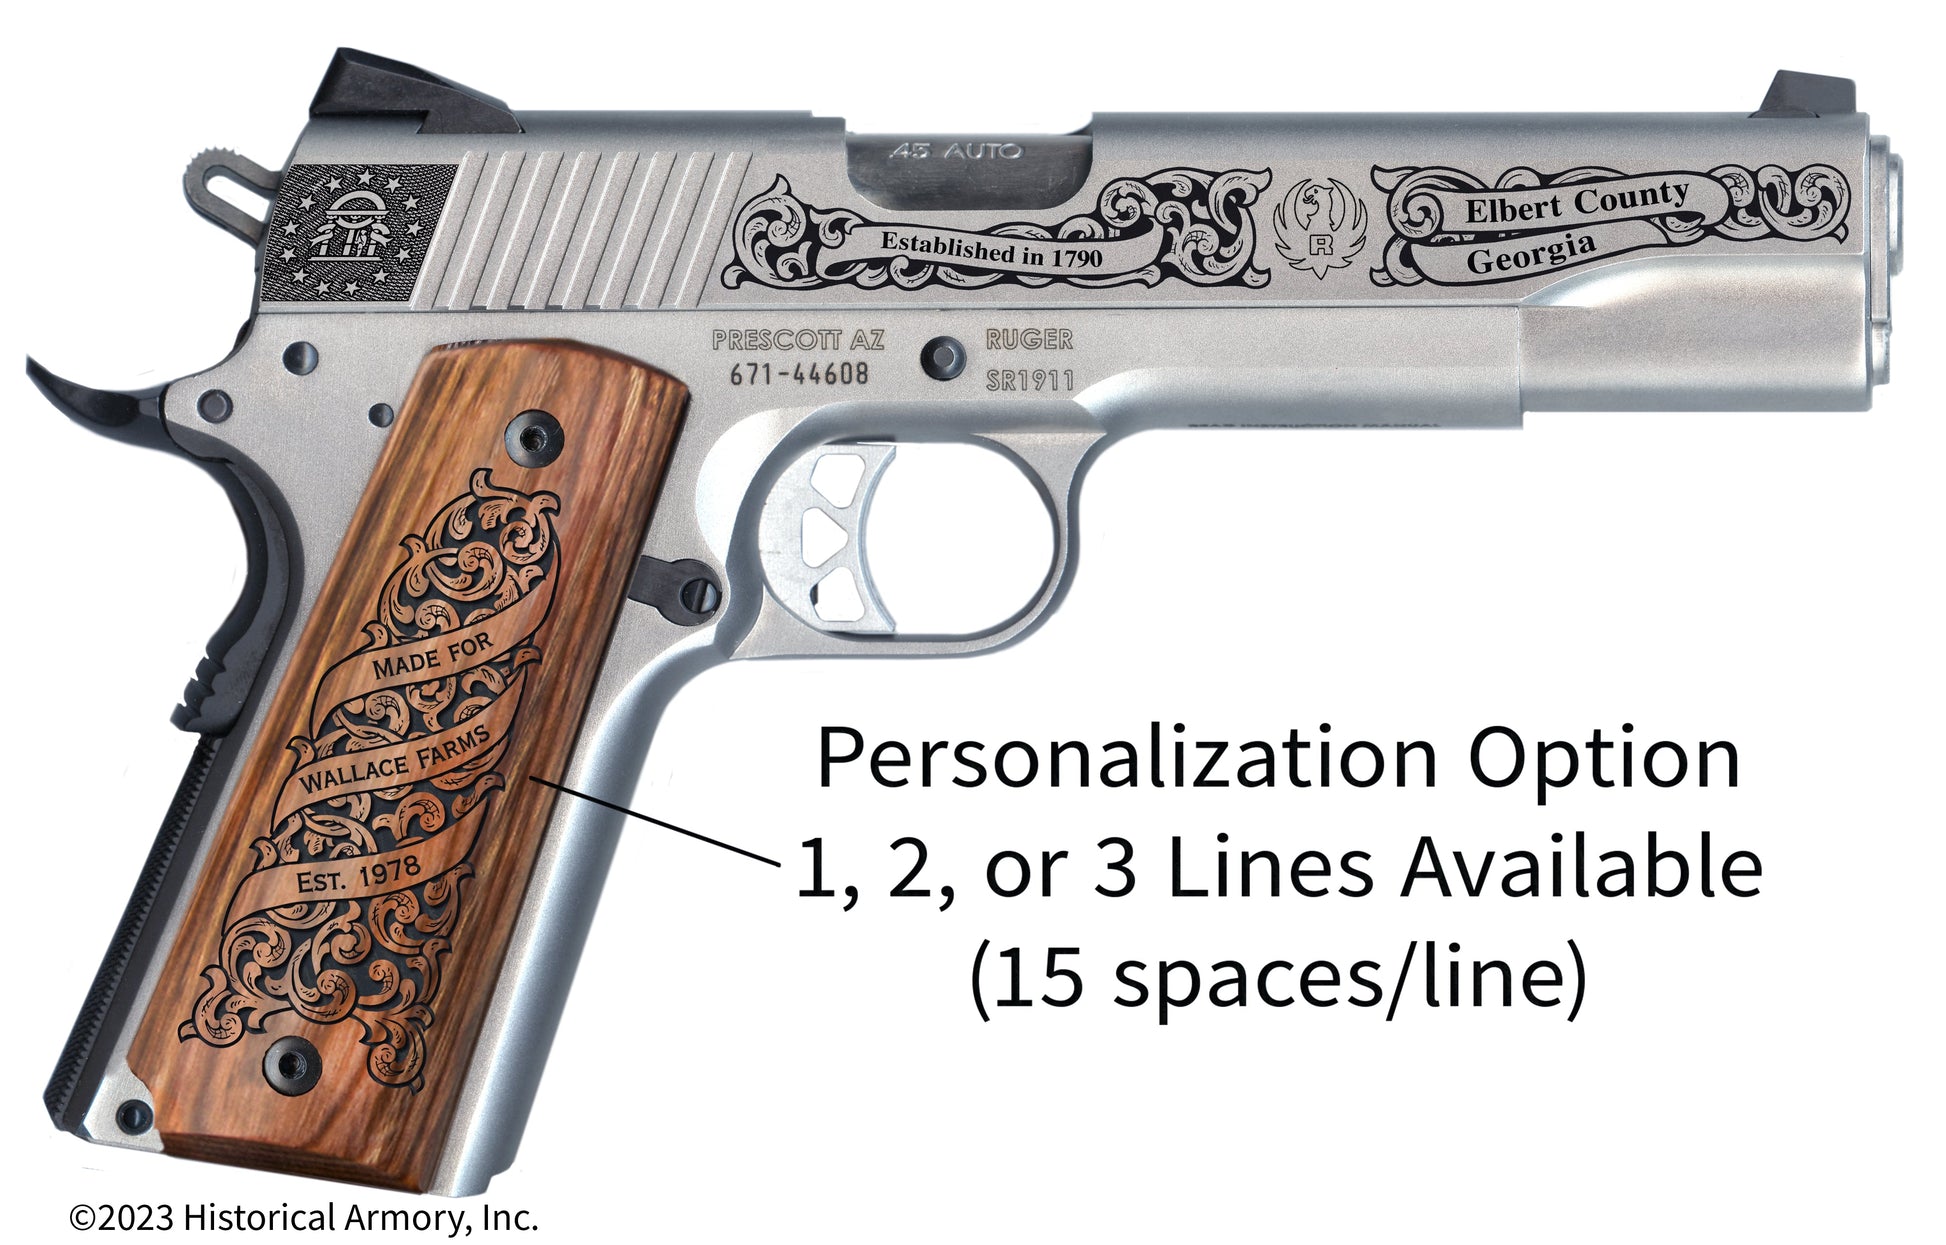 Elbert County Georgia Personalized Engraved .45 Auto Ruger 1911